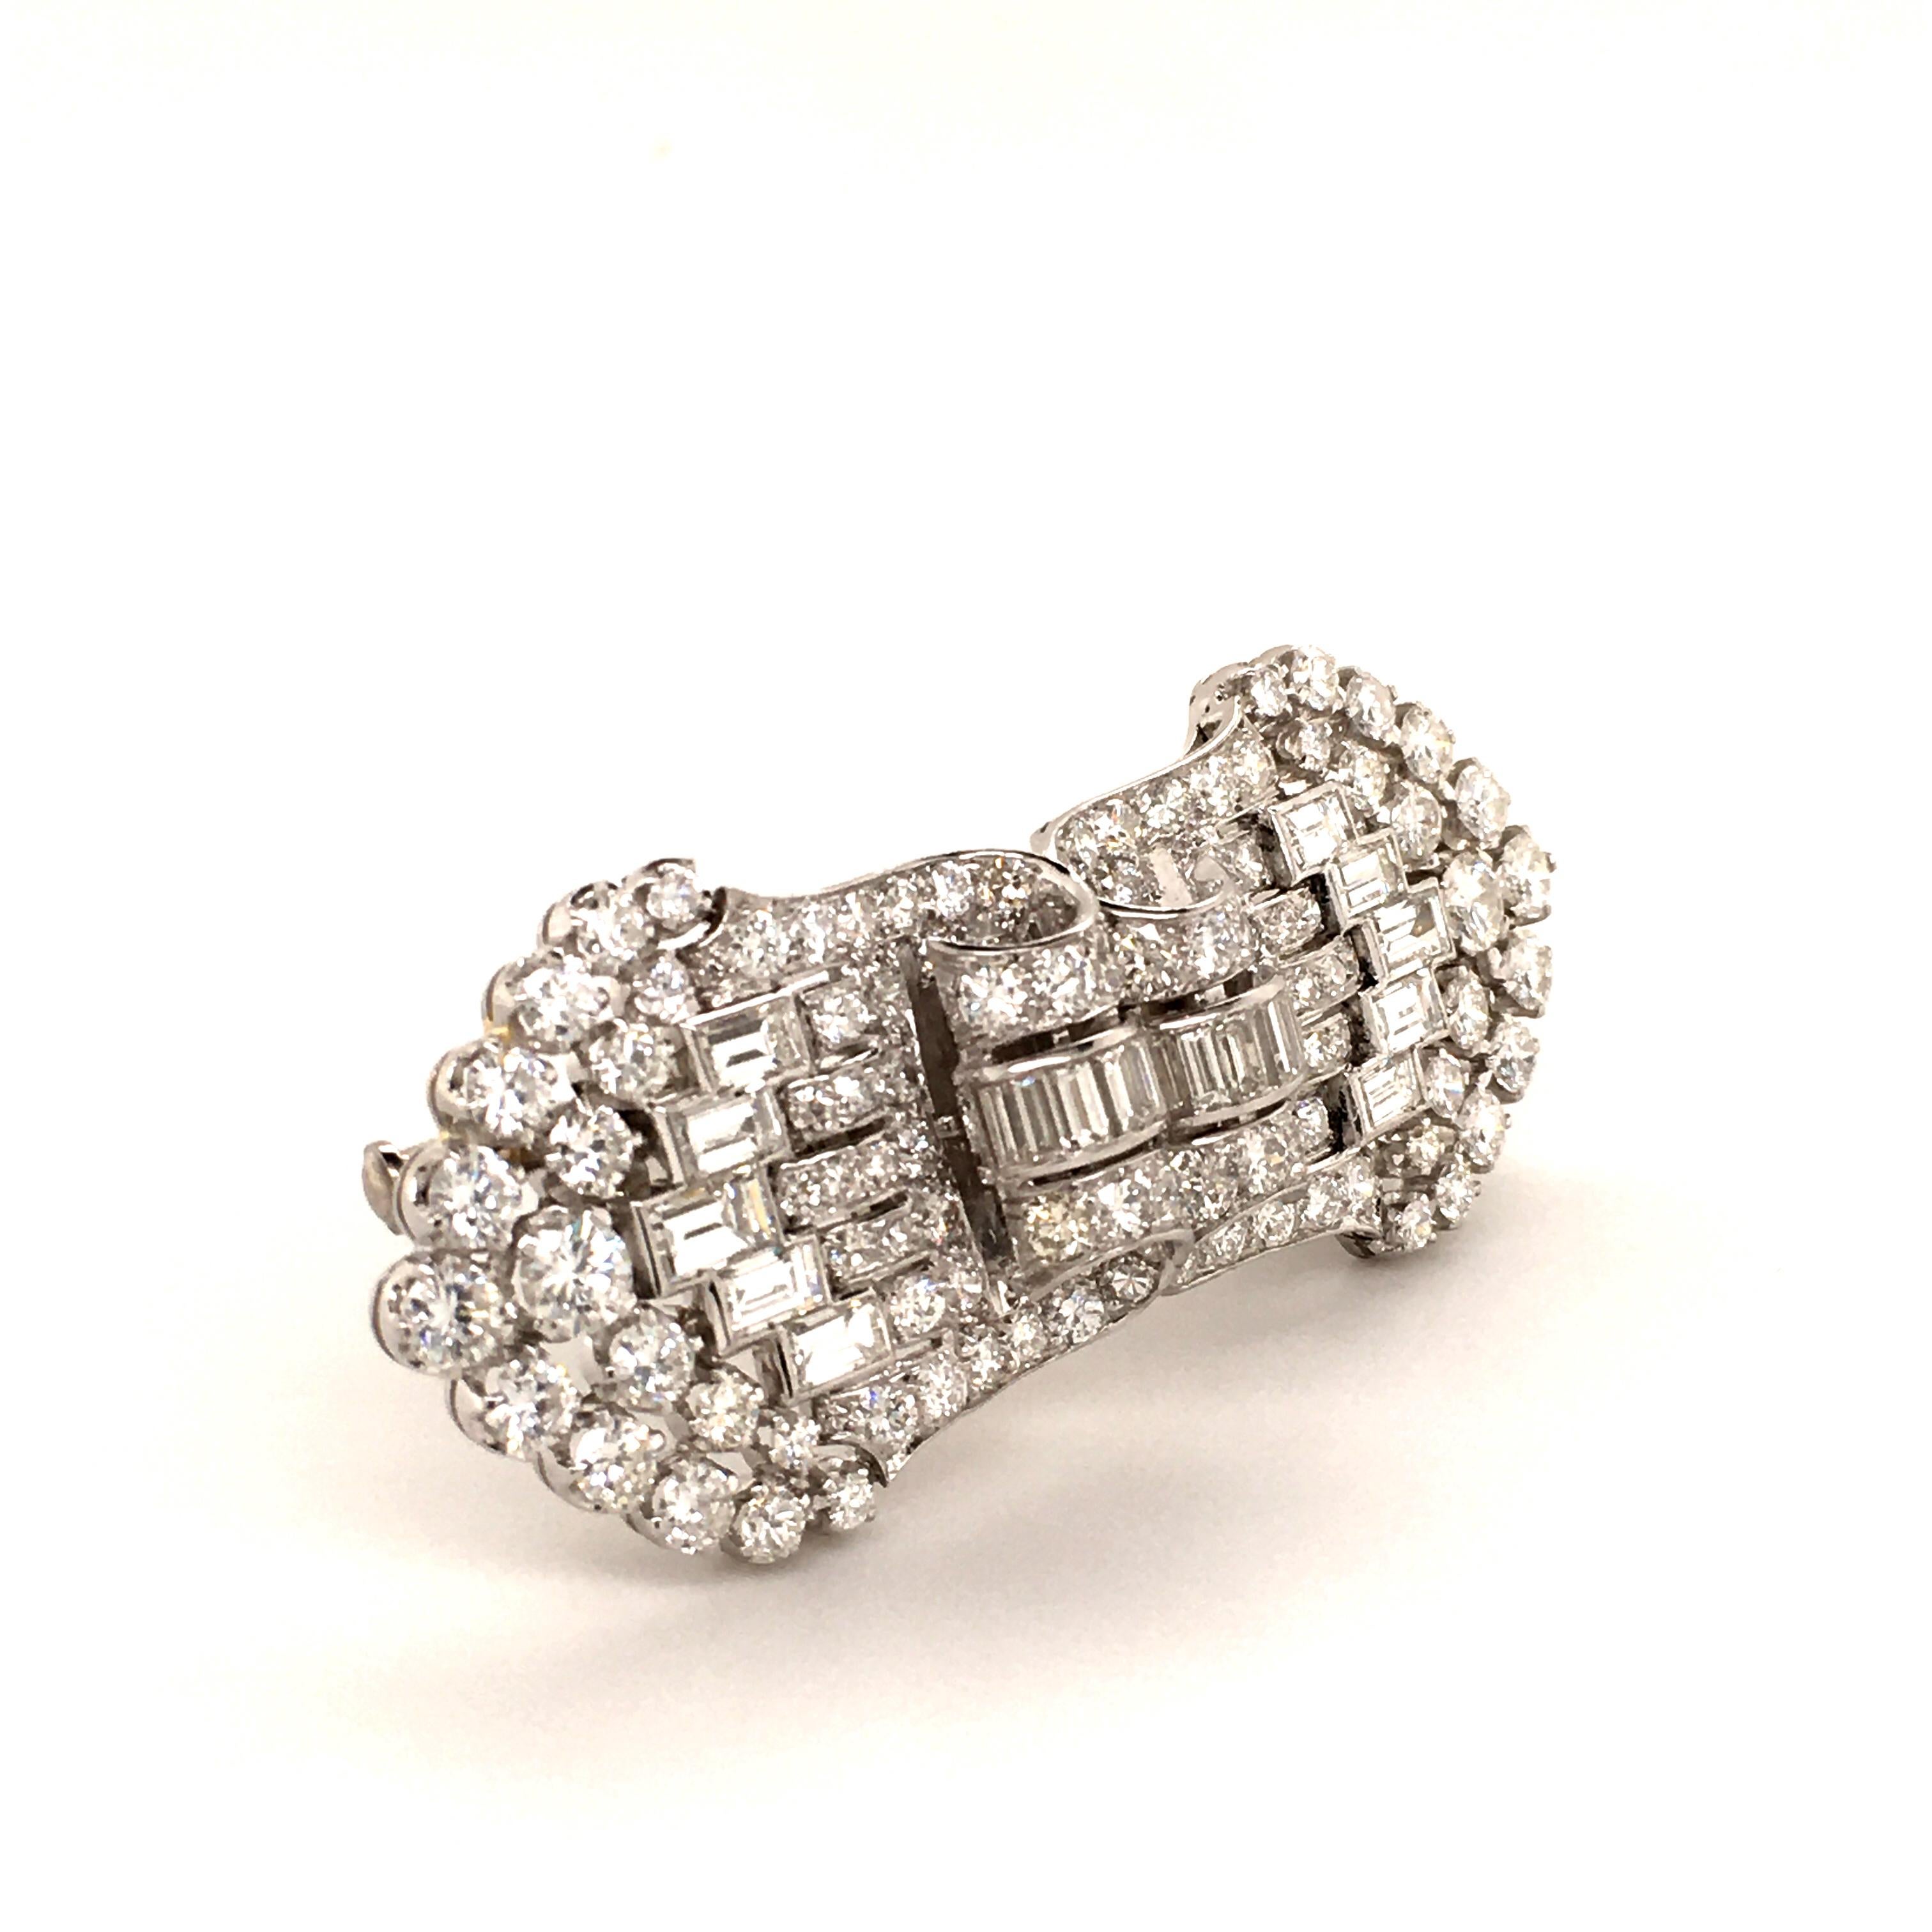 Art Deco diamond double clip brooch, set with approximately 7.10 carats of diamonds (22 baguette-cut and 112 old-cut and single-cut), G/H color and vs clarity. Mounted in platinum 950 with 18 karat white gold fitting.
Can be worn as one brooch or